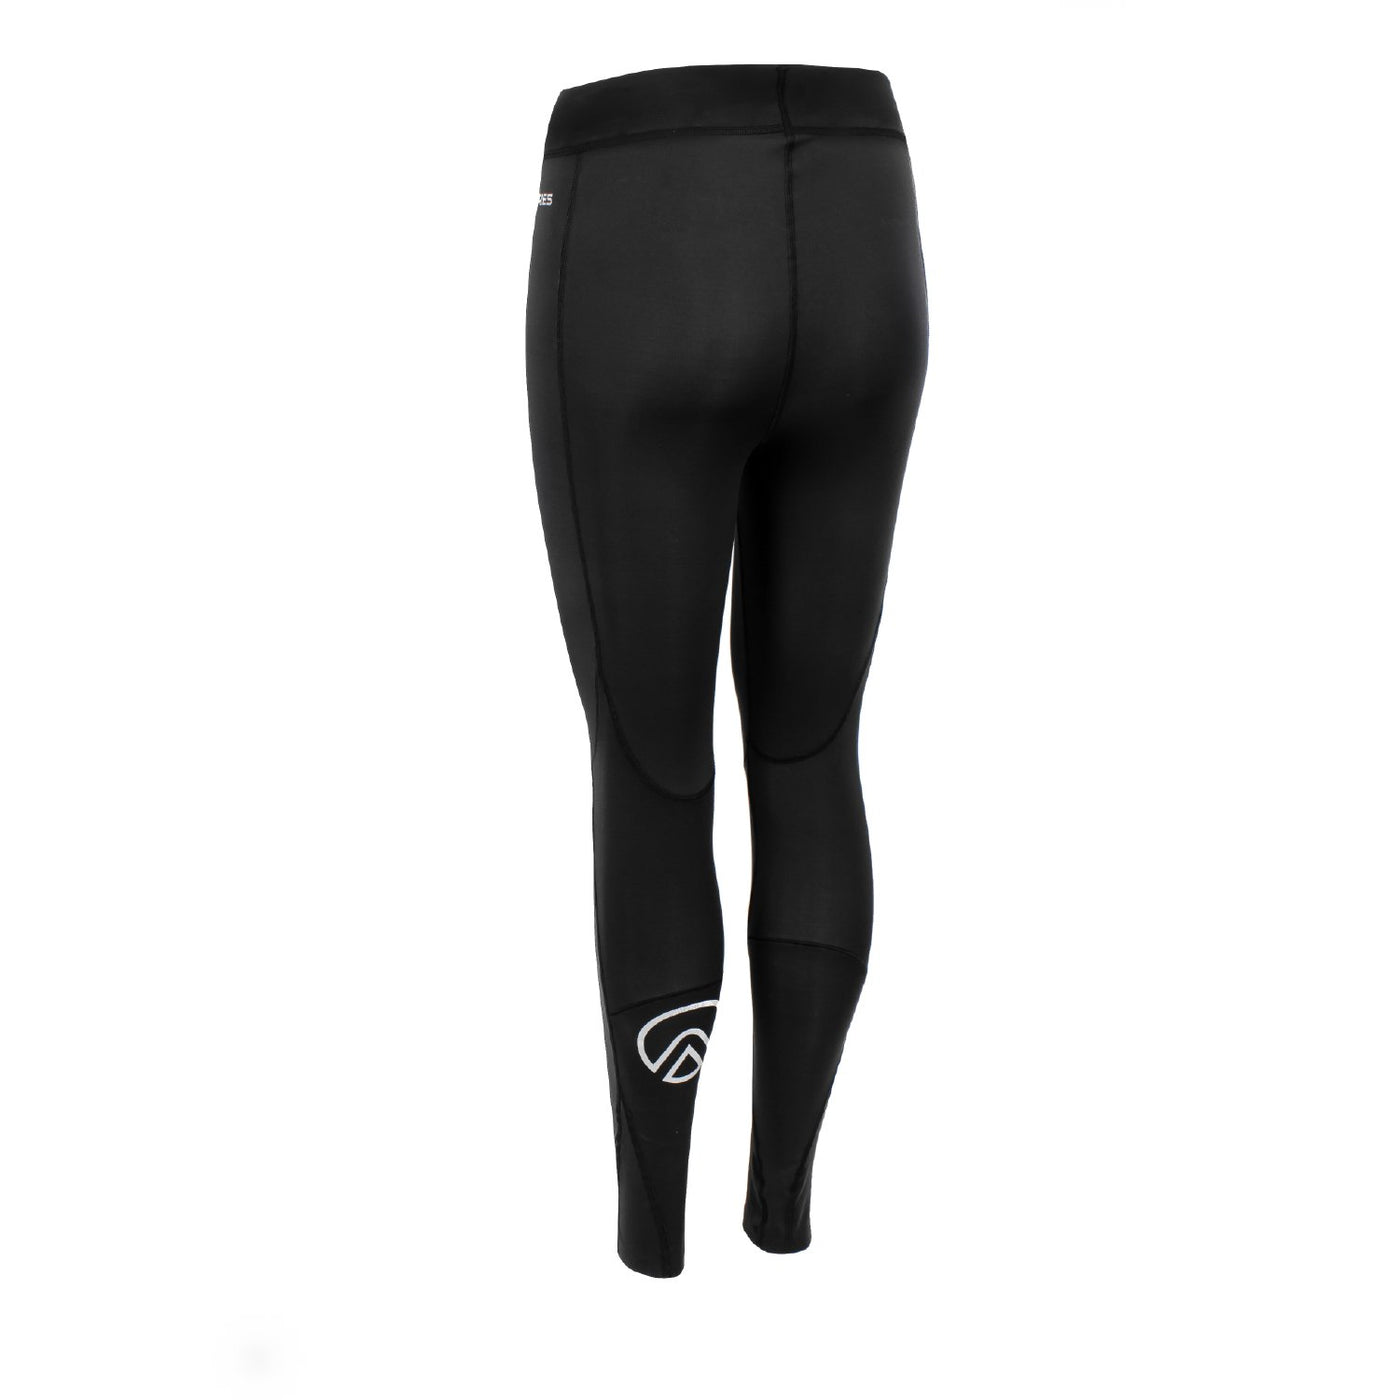 THE COMPRESSION LEGGING W/FUSED WAIST BAND